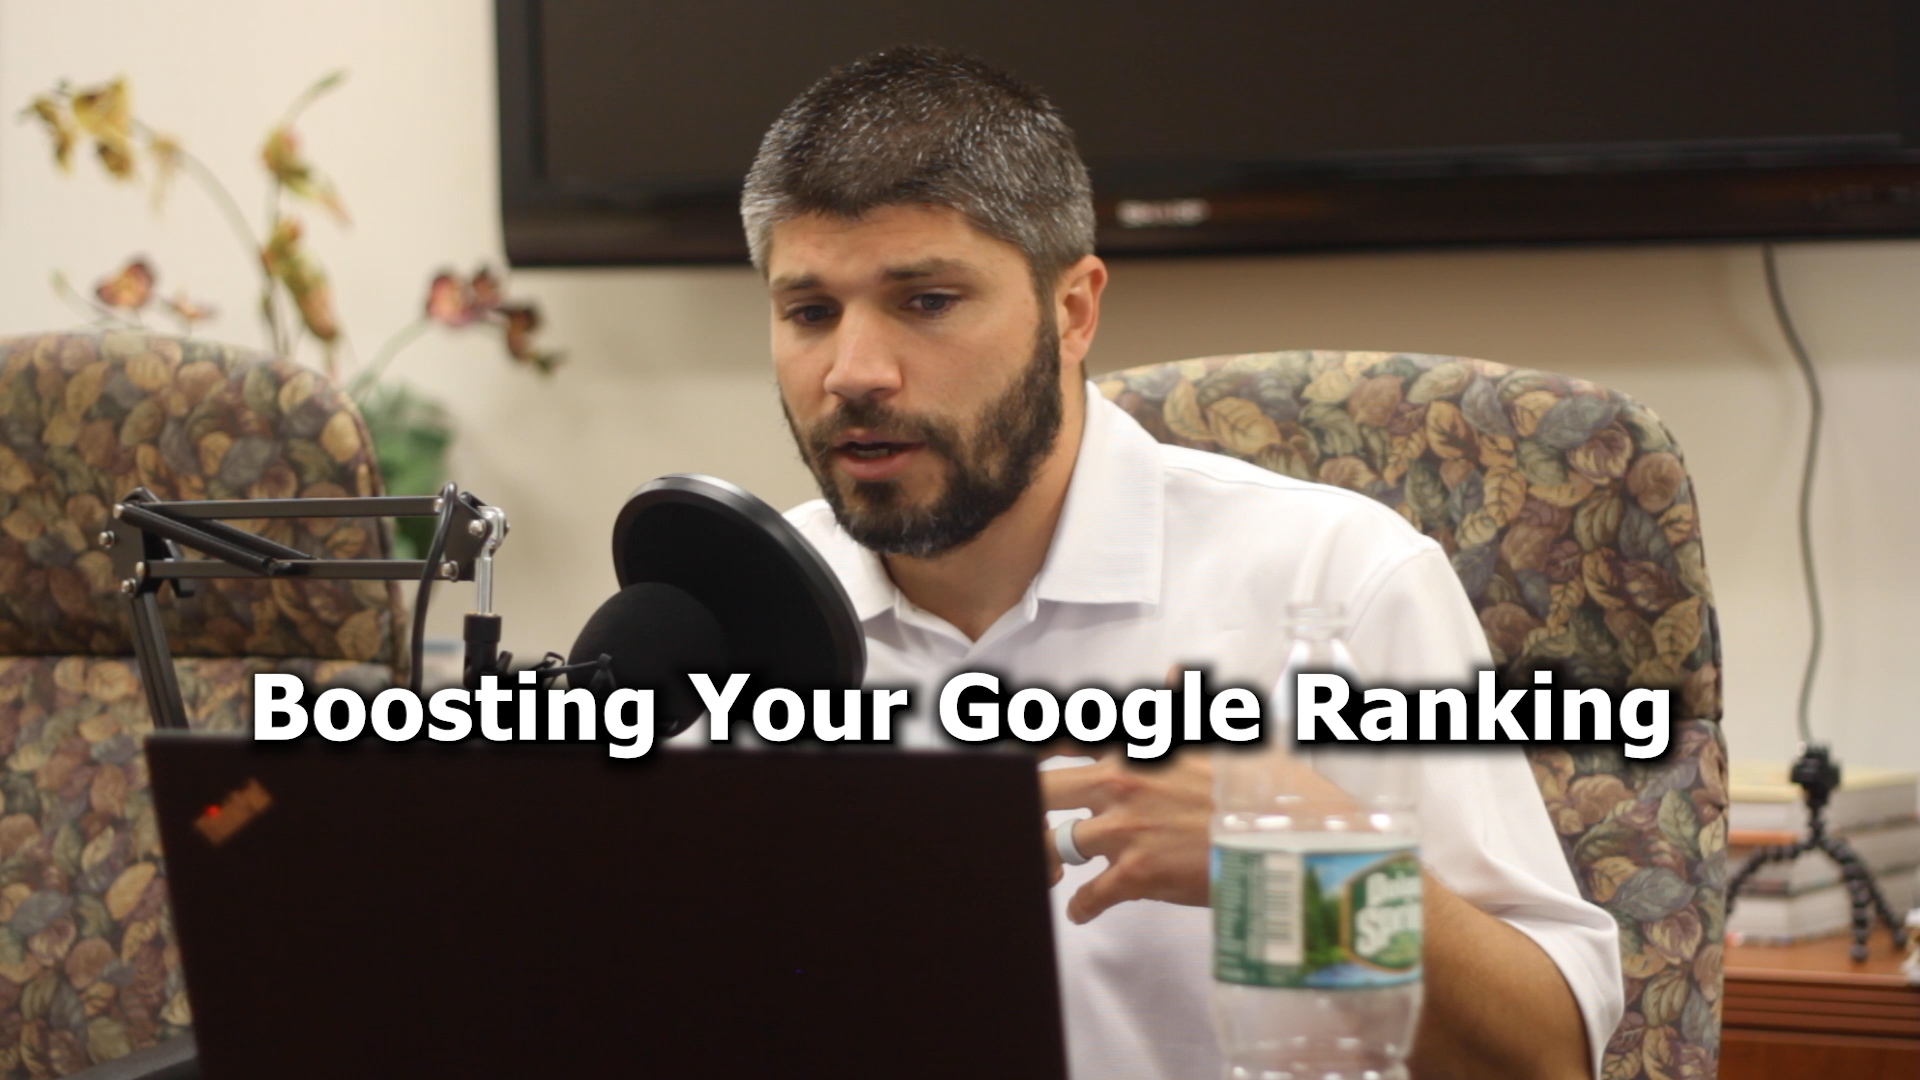 Making SEO Work for You - The Messengers Podcast